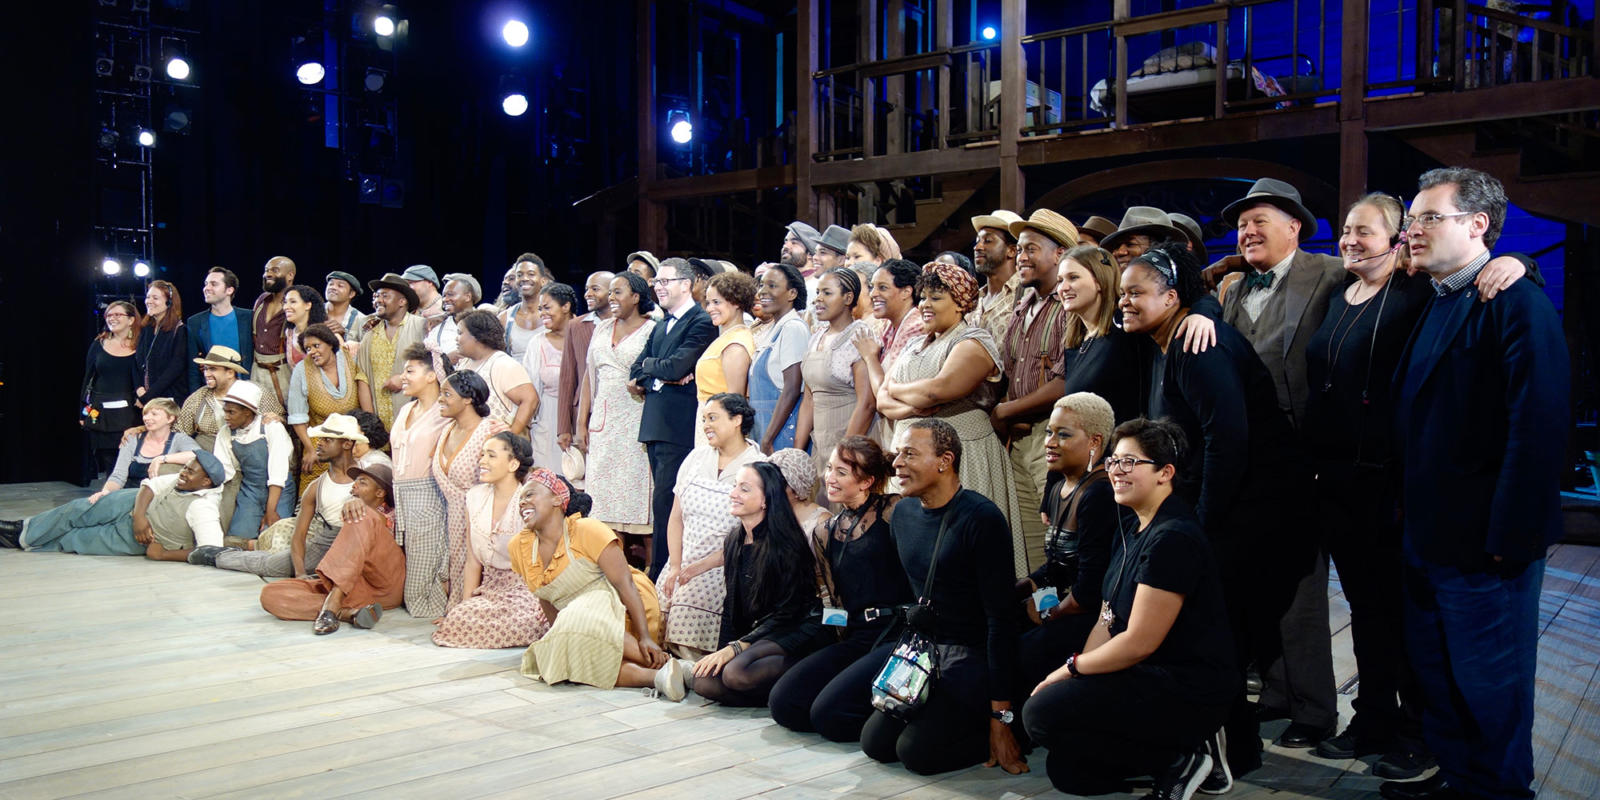 ENO Porgy and Bess: cast and crew posing for a group photo